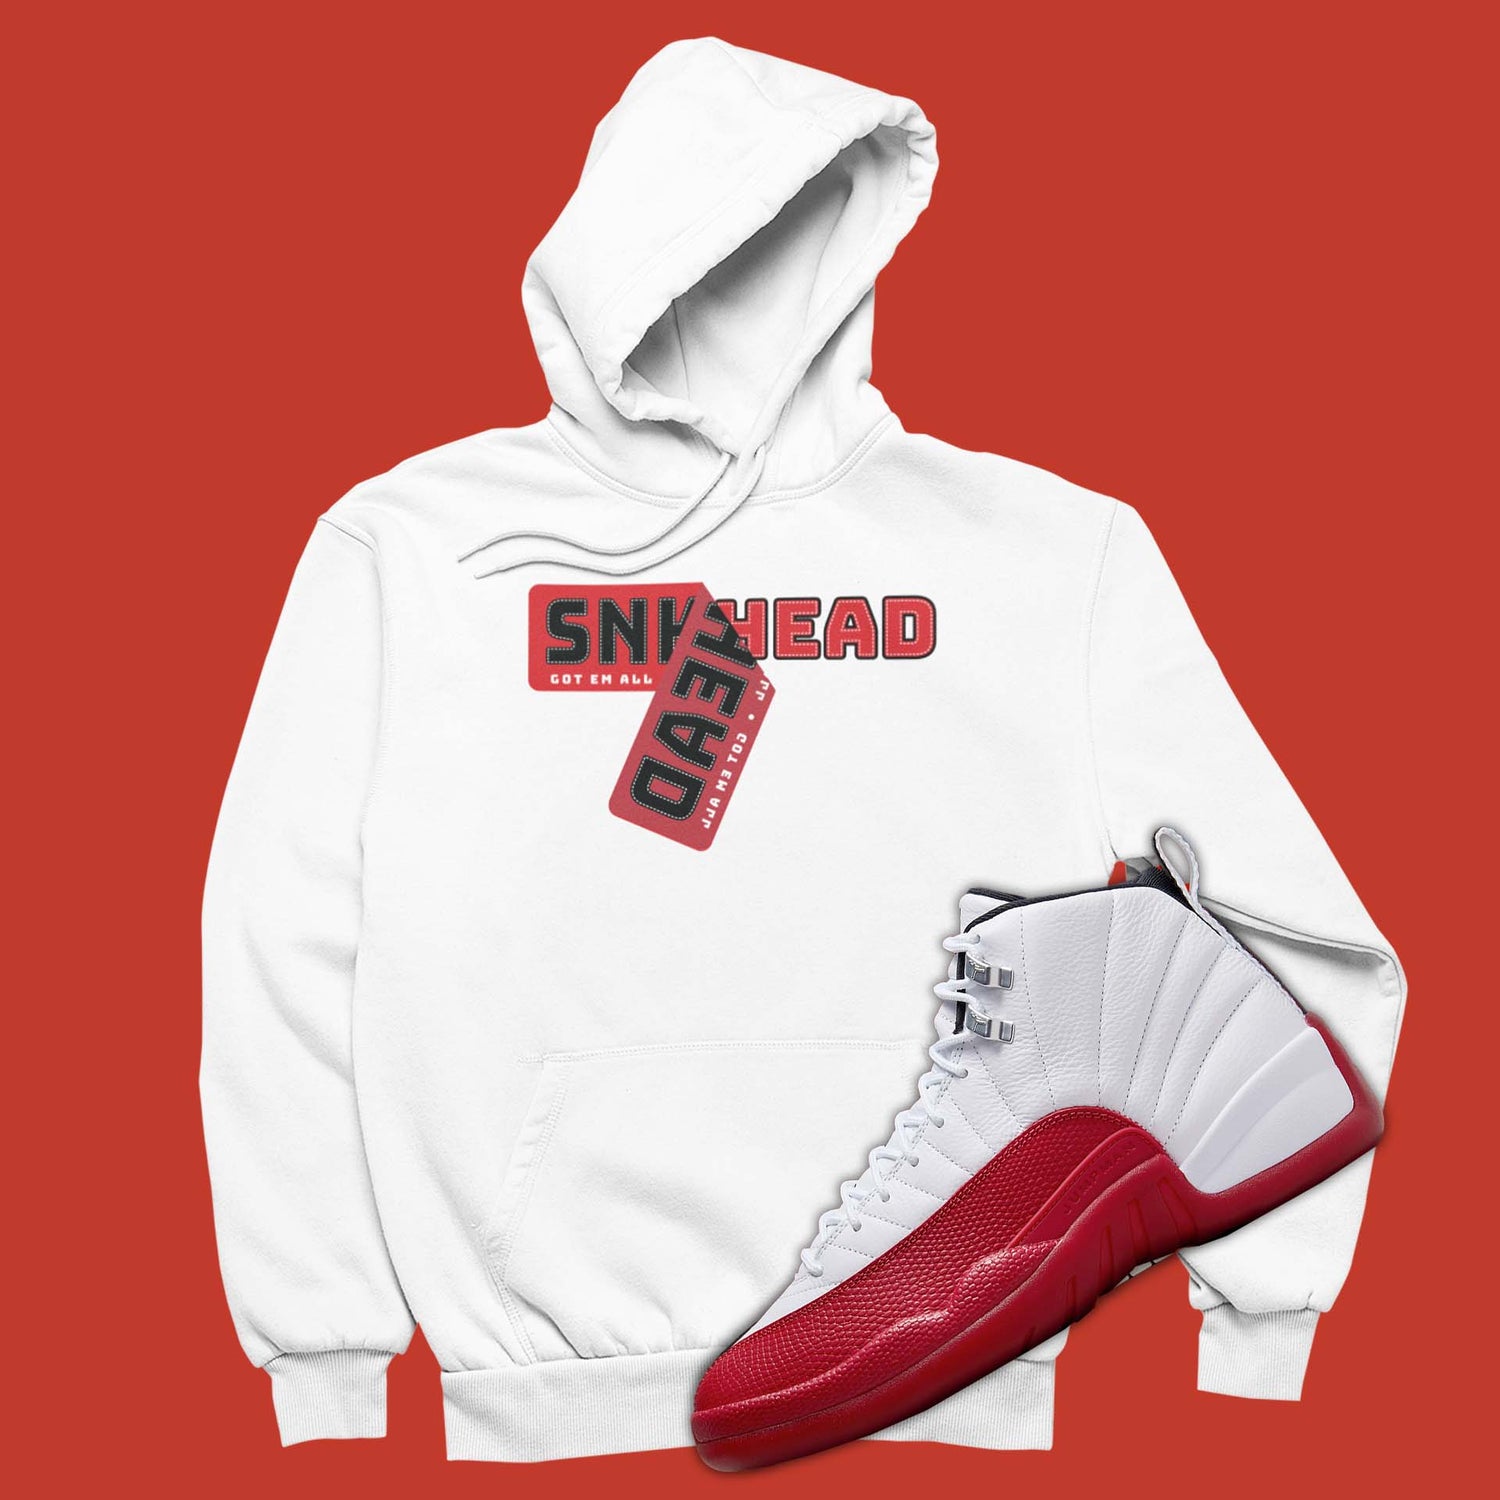 This sneaker match hoodie is the perfect sweatshirt to match your Air Jordan 12 Cherry